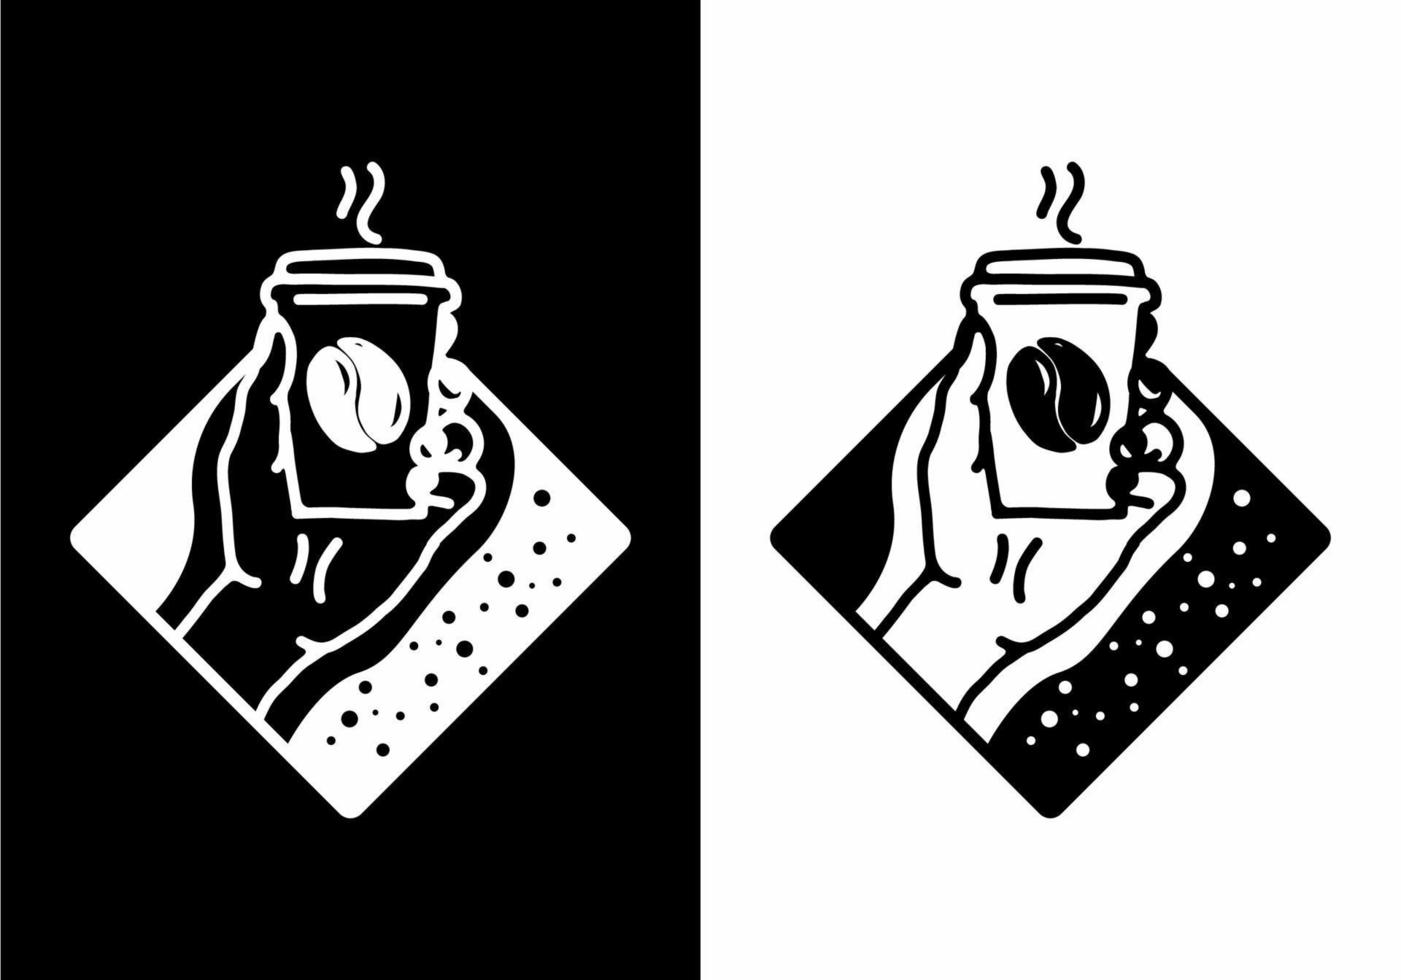 Black and white line art illustration of hand holding a coffee vector